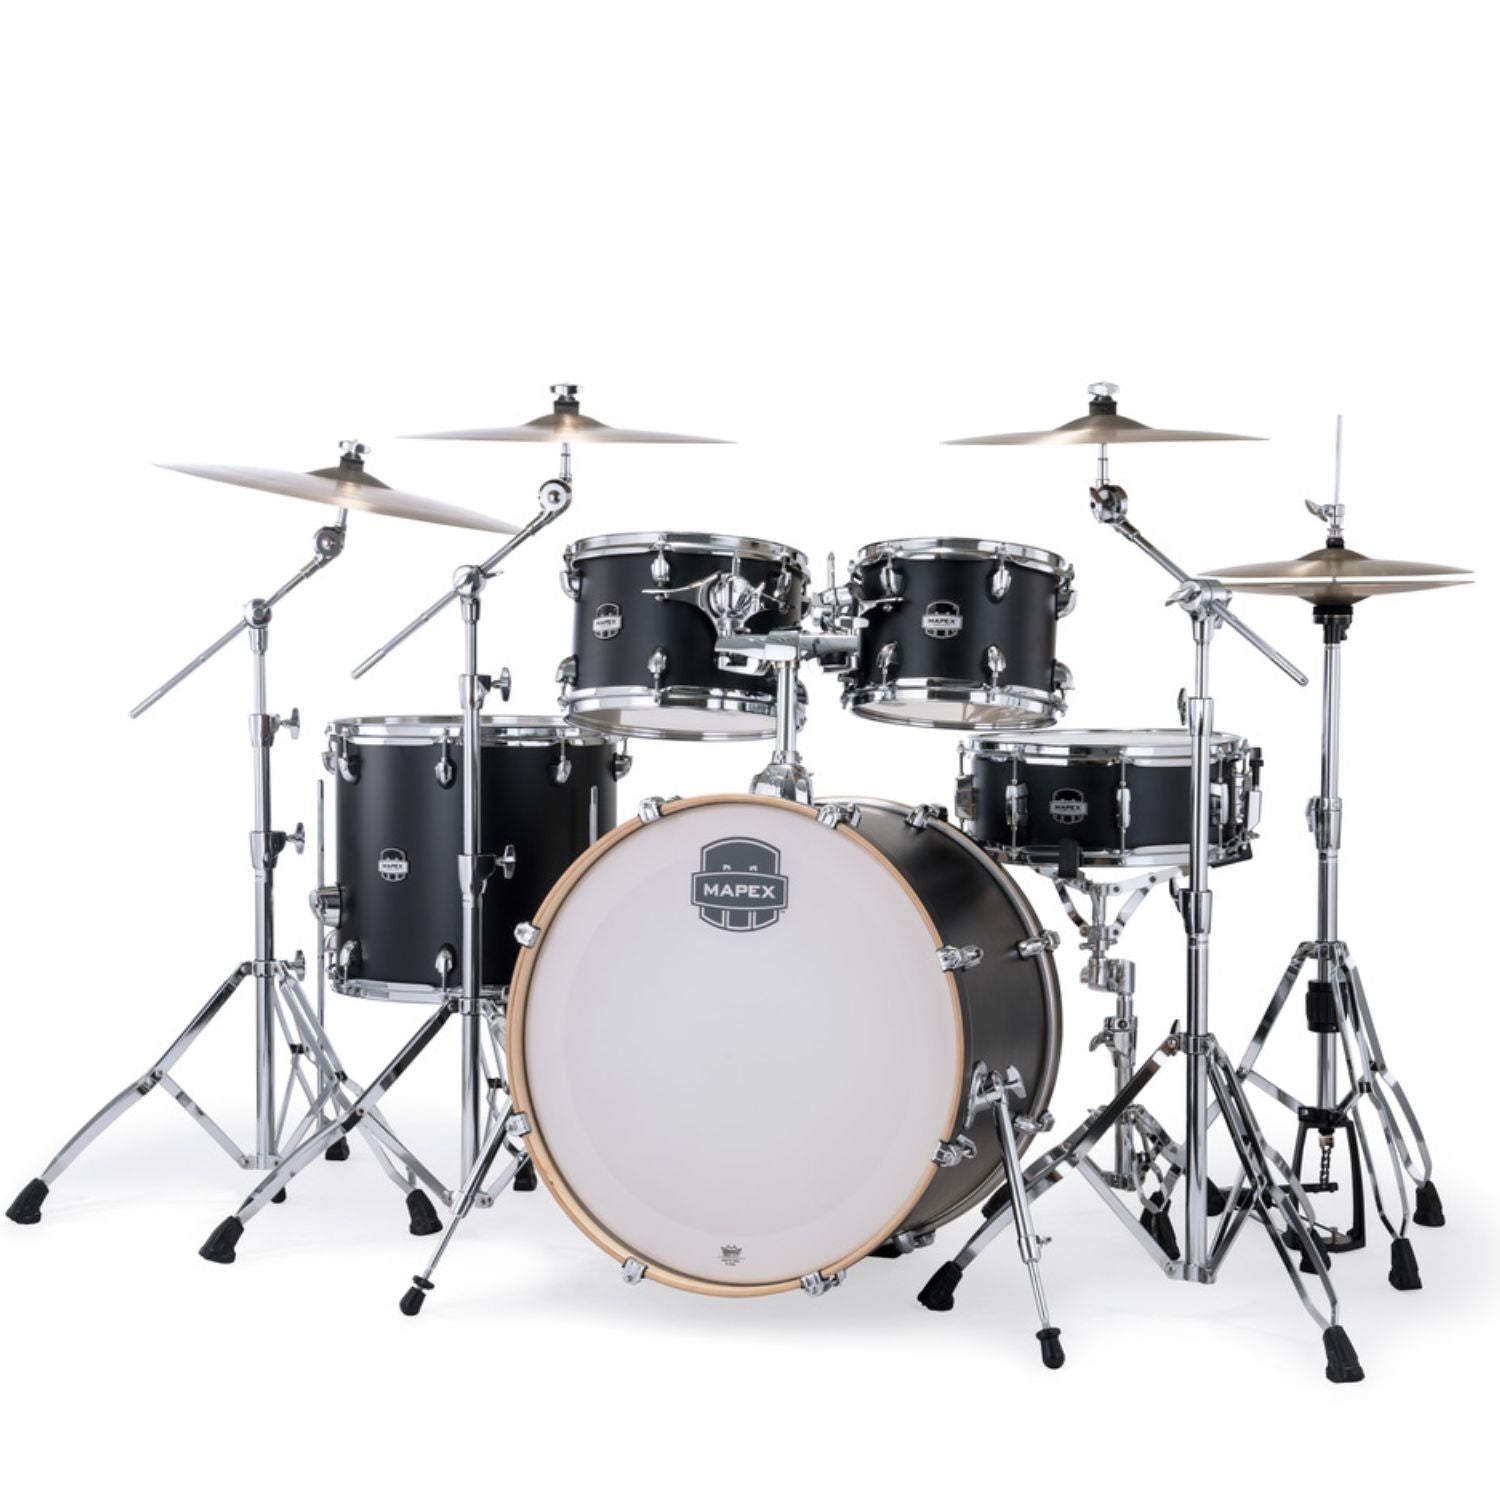 Trống Cơ Mapex Mars Maple MM529SF (22/10 - 12/16/14) + Hardware L4HPACK 400 Series + Cymbal PAISTE PST3 - Việt Music